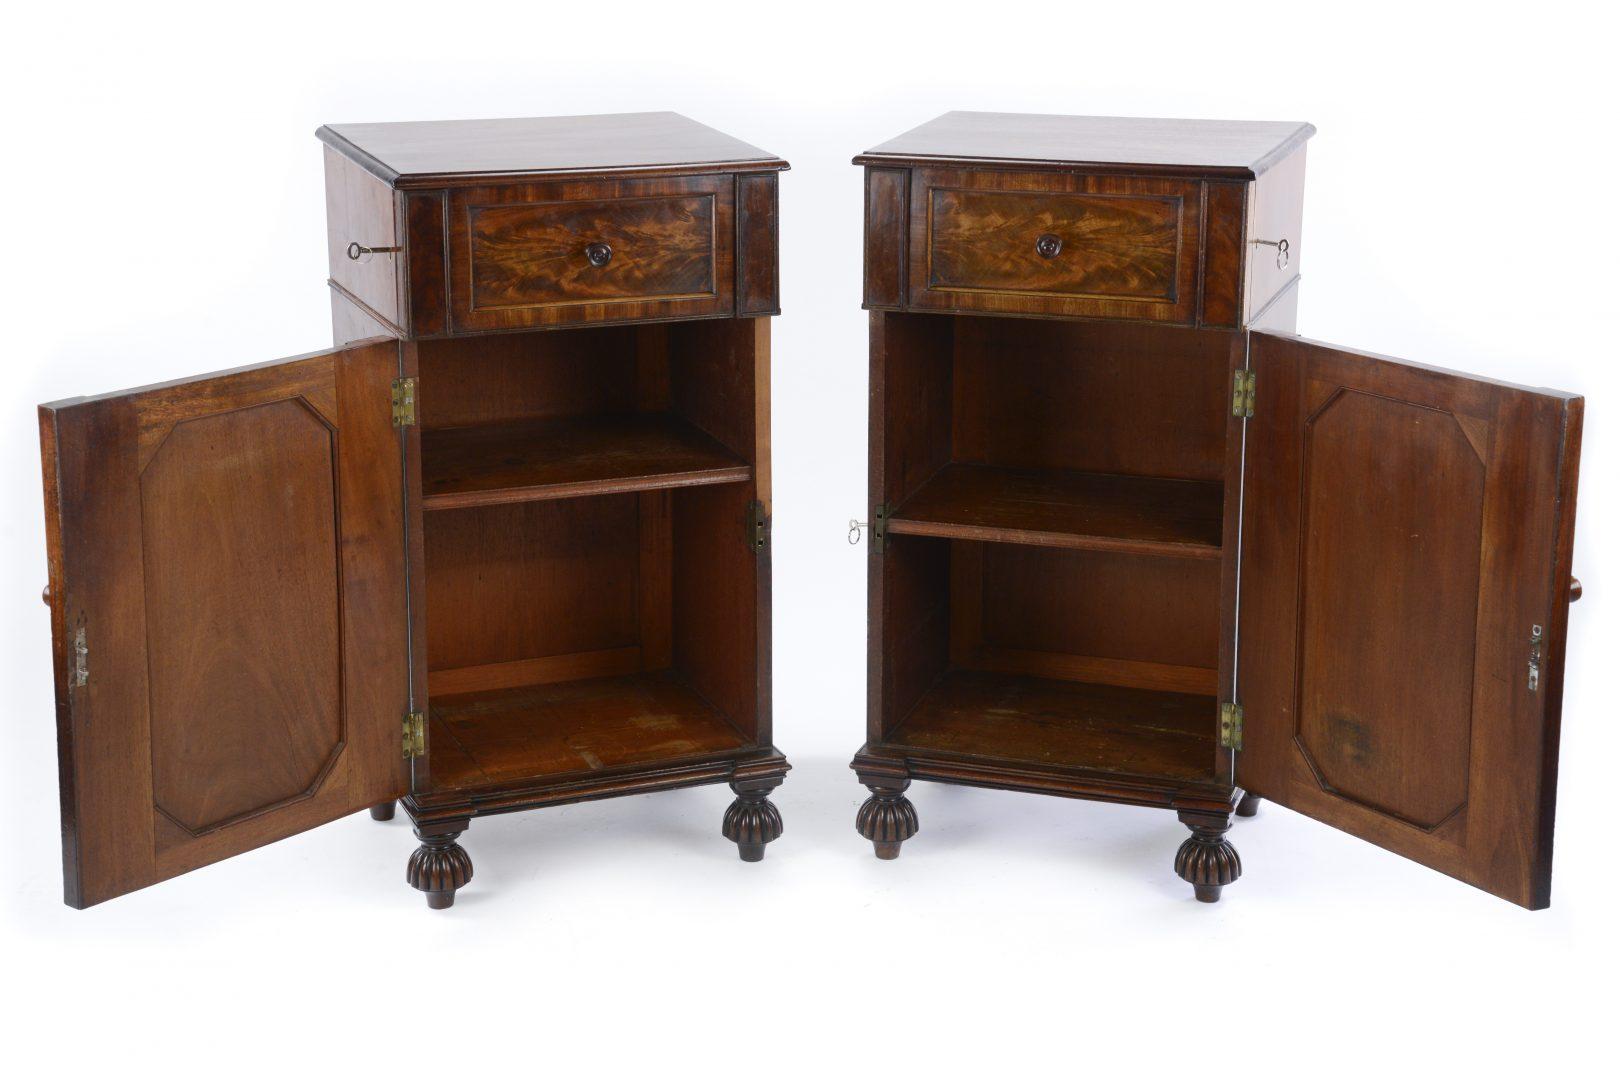 A pair of William IV mahogany pedestal cupboards, in the manner of Gillows, each with panel door and draw on reeded supports.

Gillows of Lancaster and London, also known as Gillow & Co., was an English furniture making firm based in Lancaster,